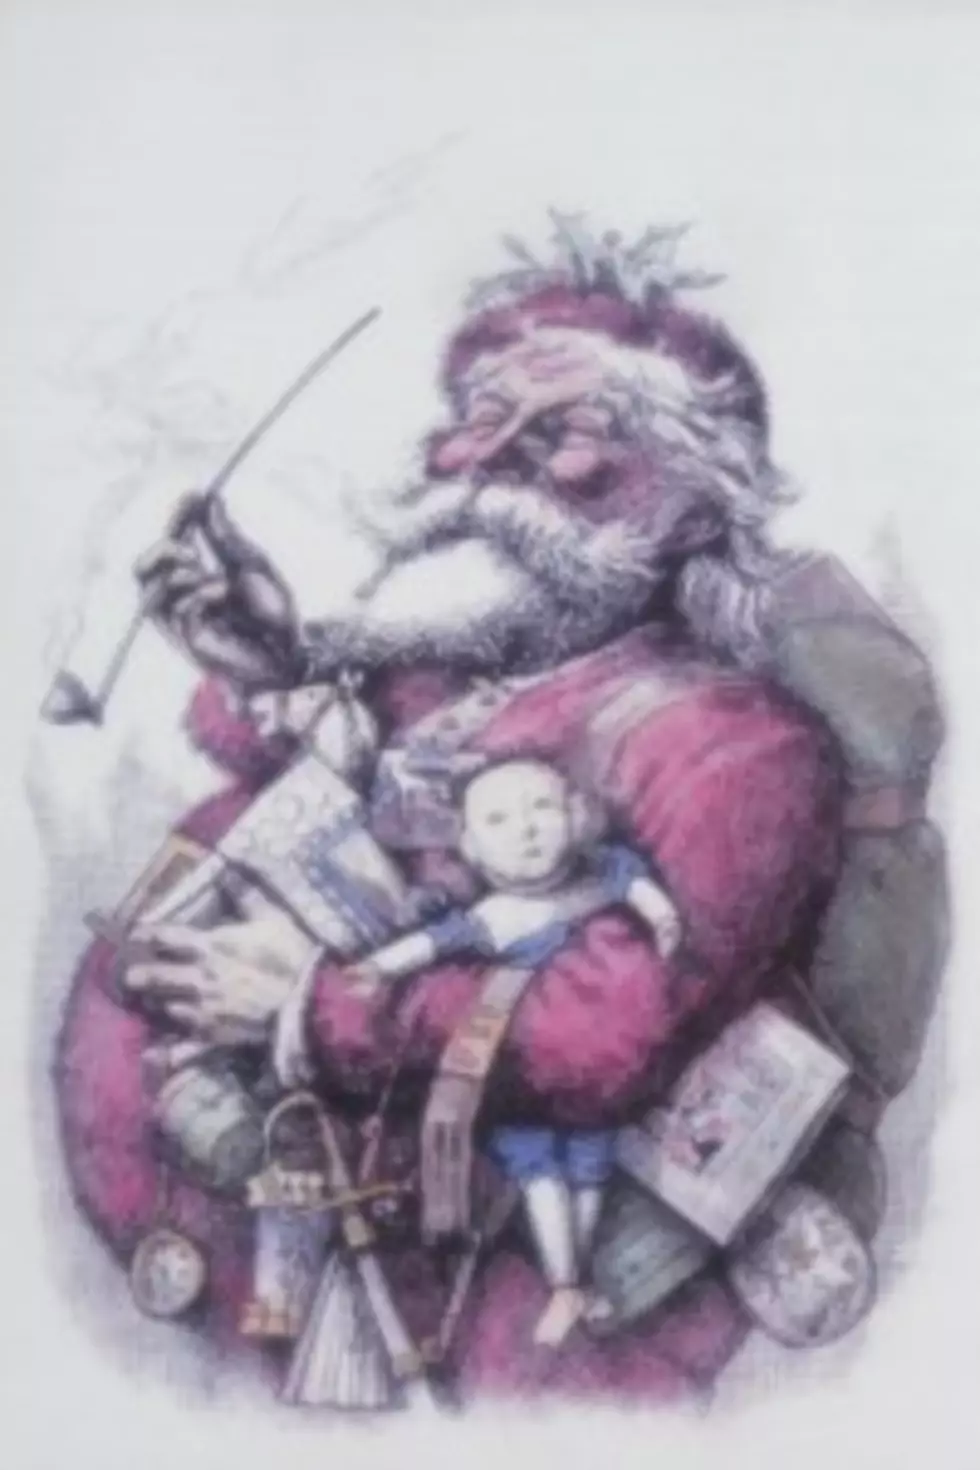 Santa&#8217;s Pipe Disappears In a New Version of &#8216;Twas the Night Before Christmas&#8217;